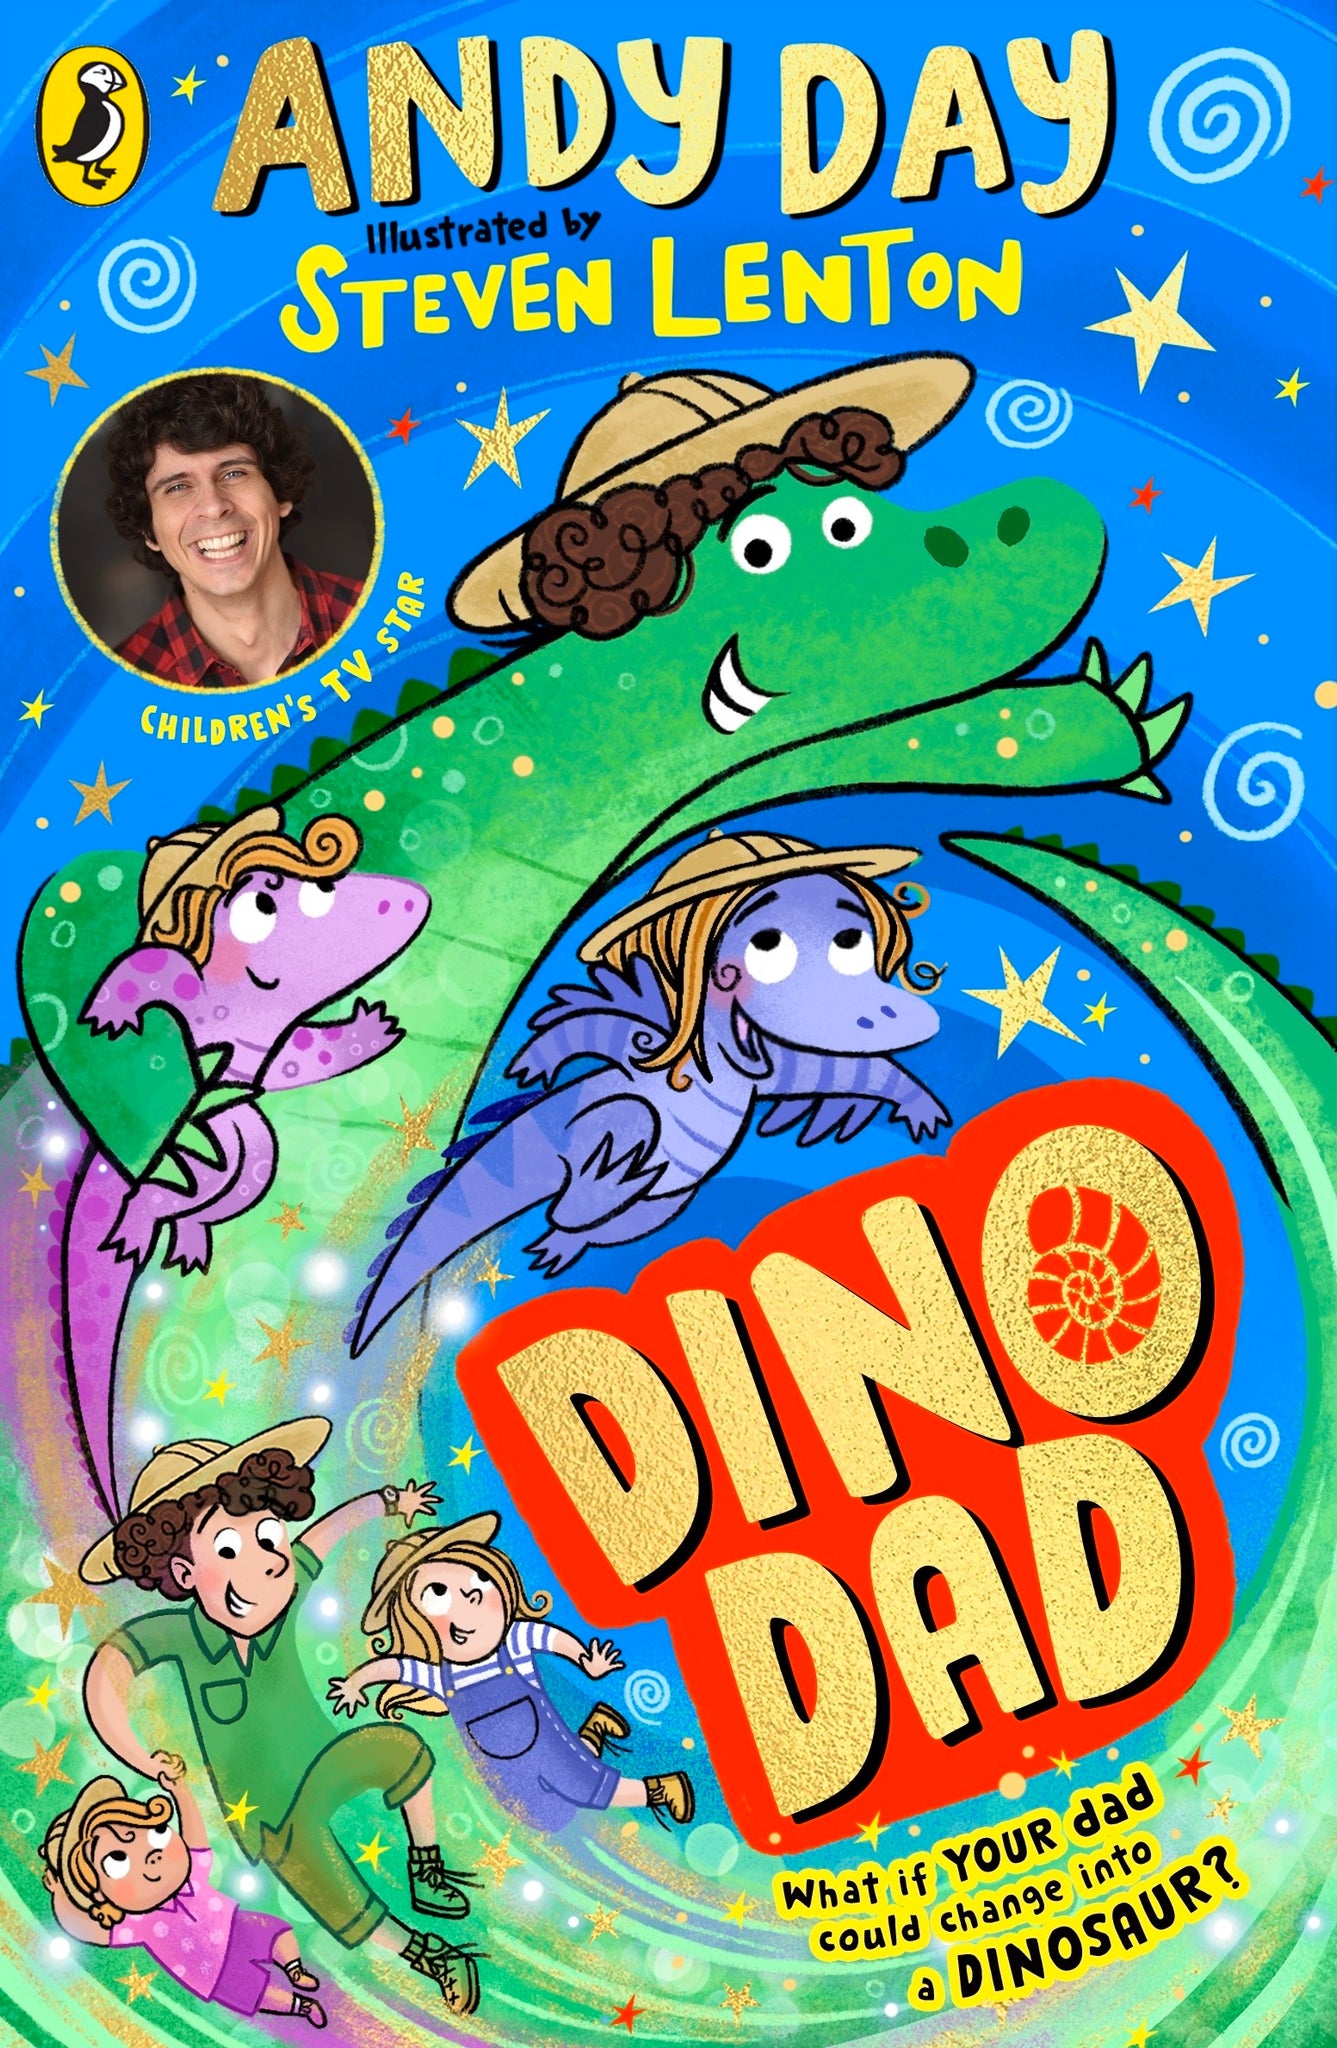 EVENT 17/05/24 Andy Day introduces Dino Dad (Henleaze Juniors & Infants discount)